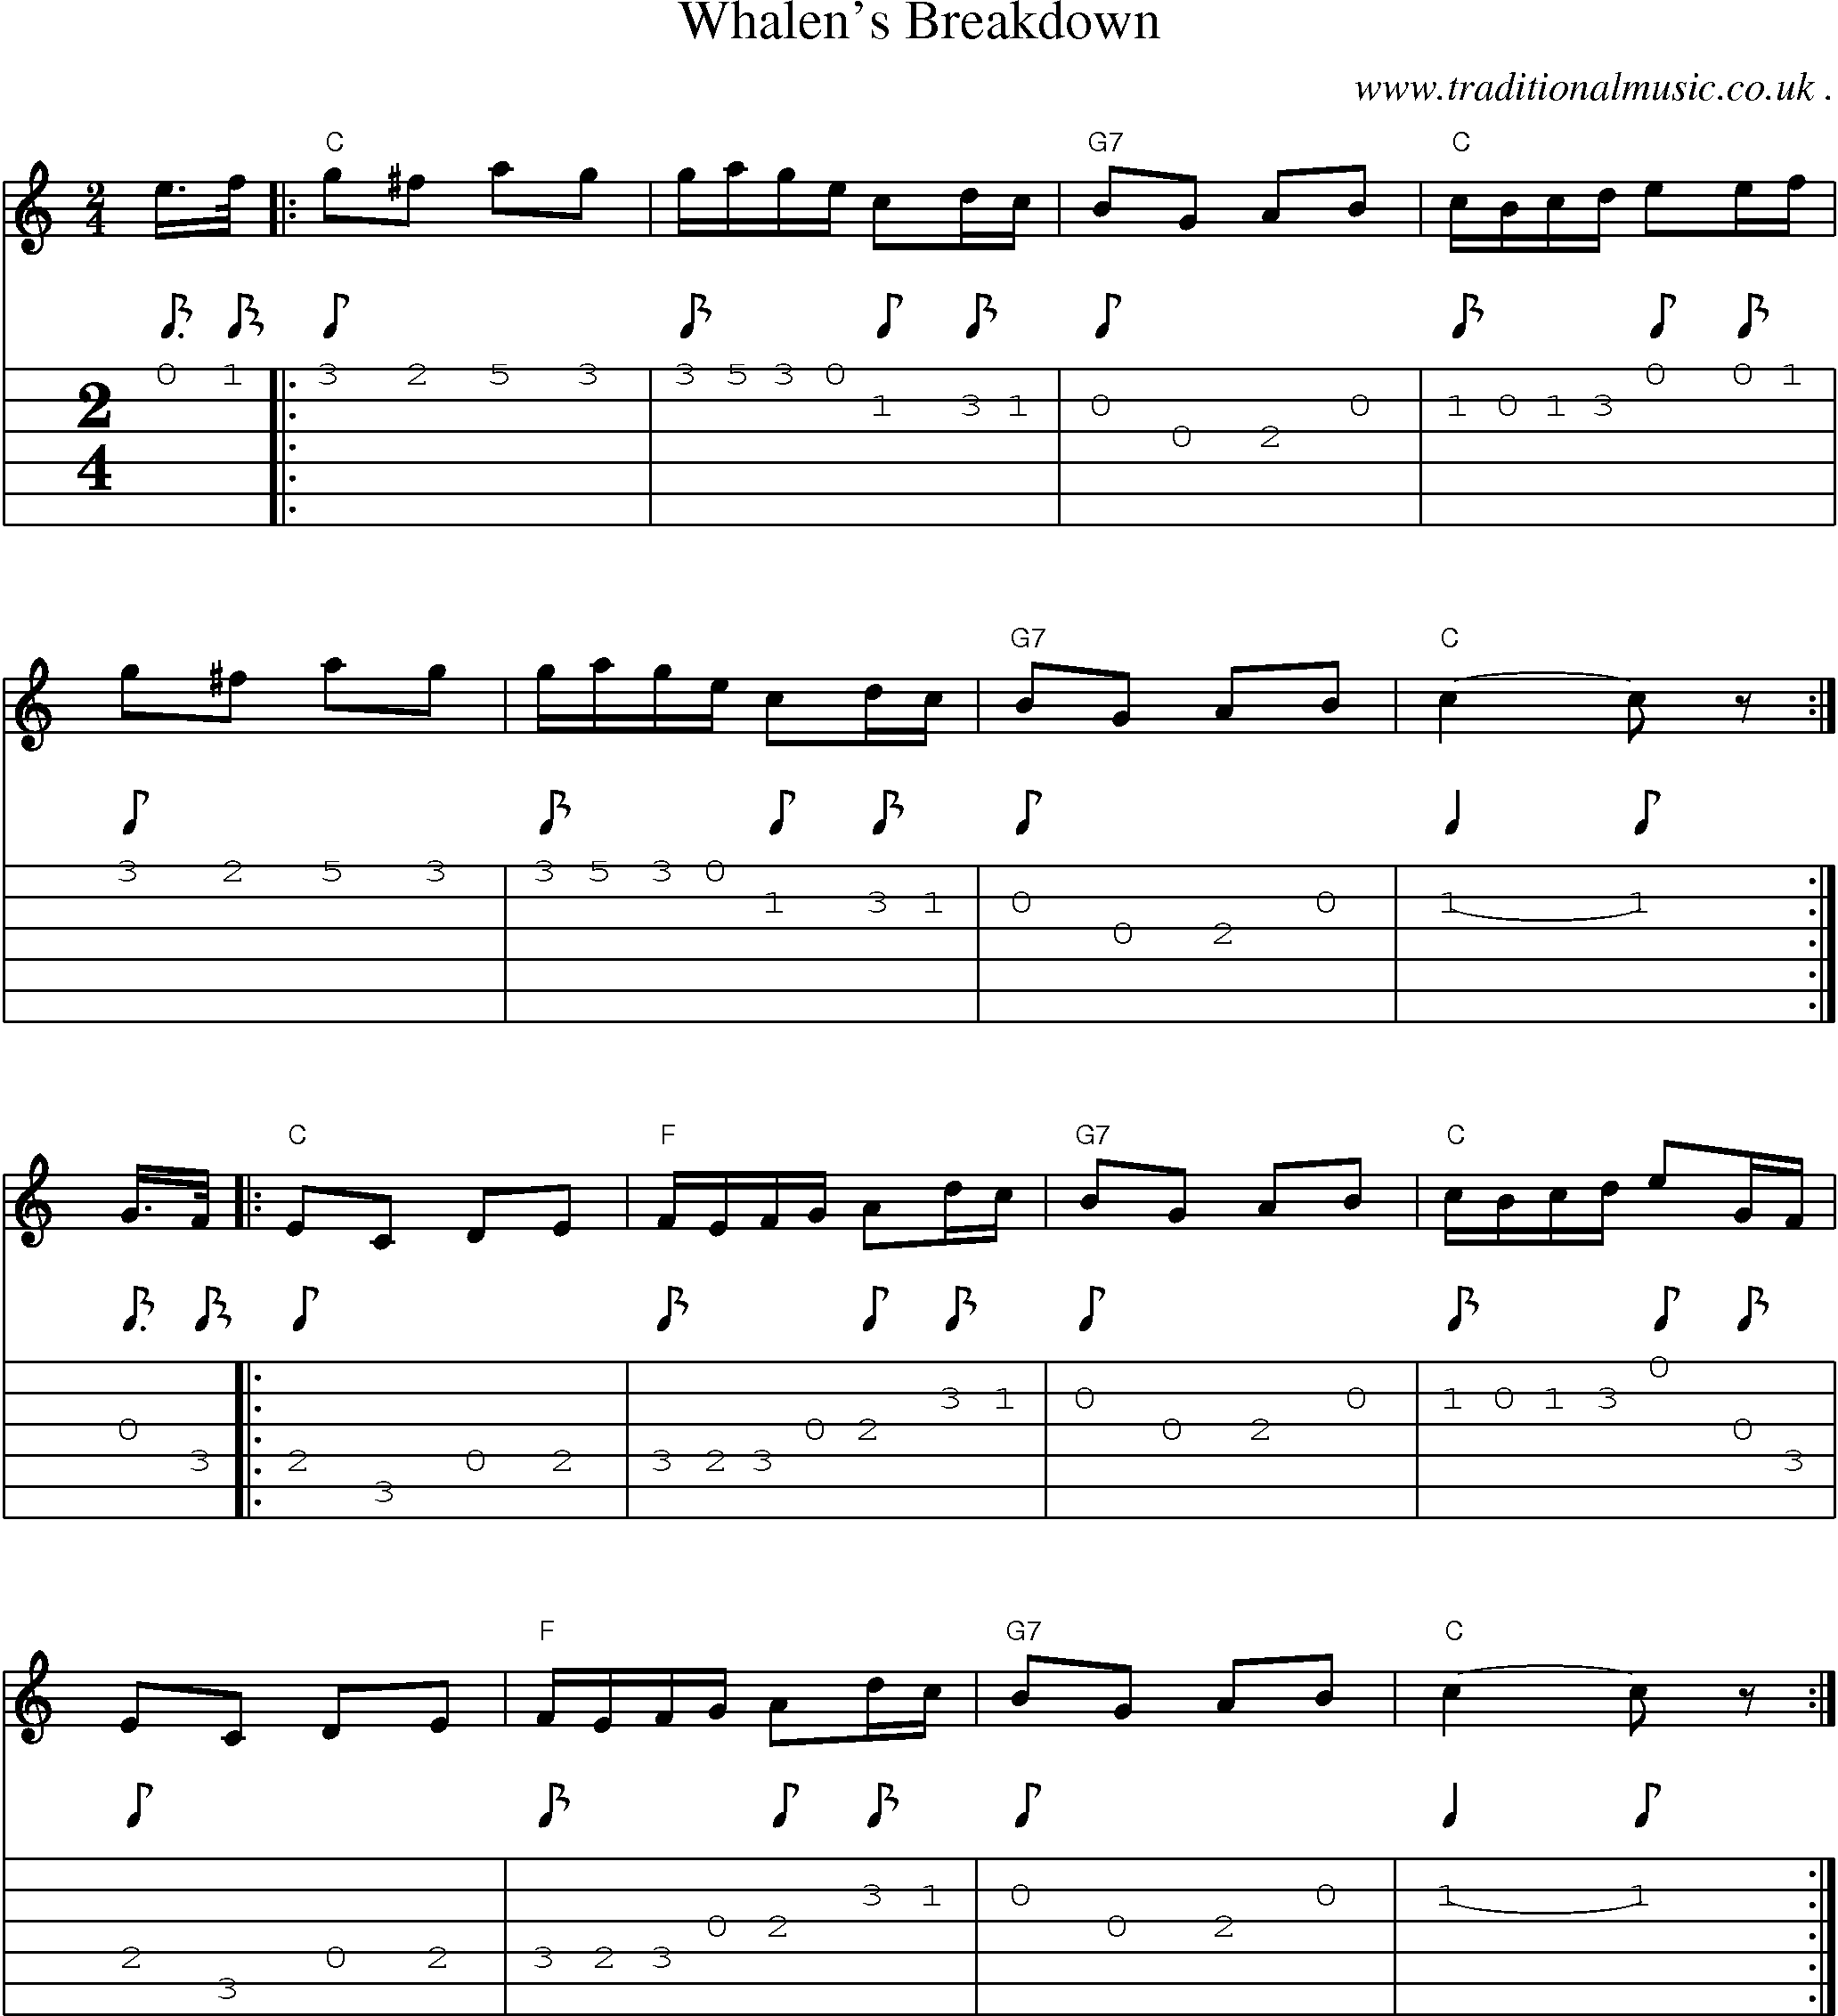 Music Score and Guitar Tabs for Whalens Breakdown